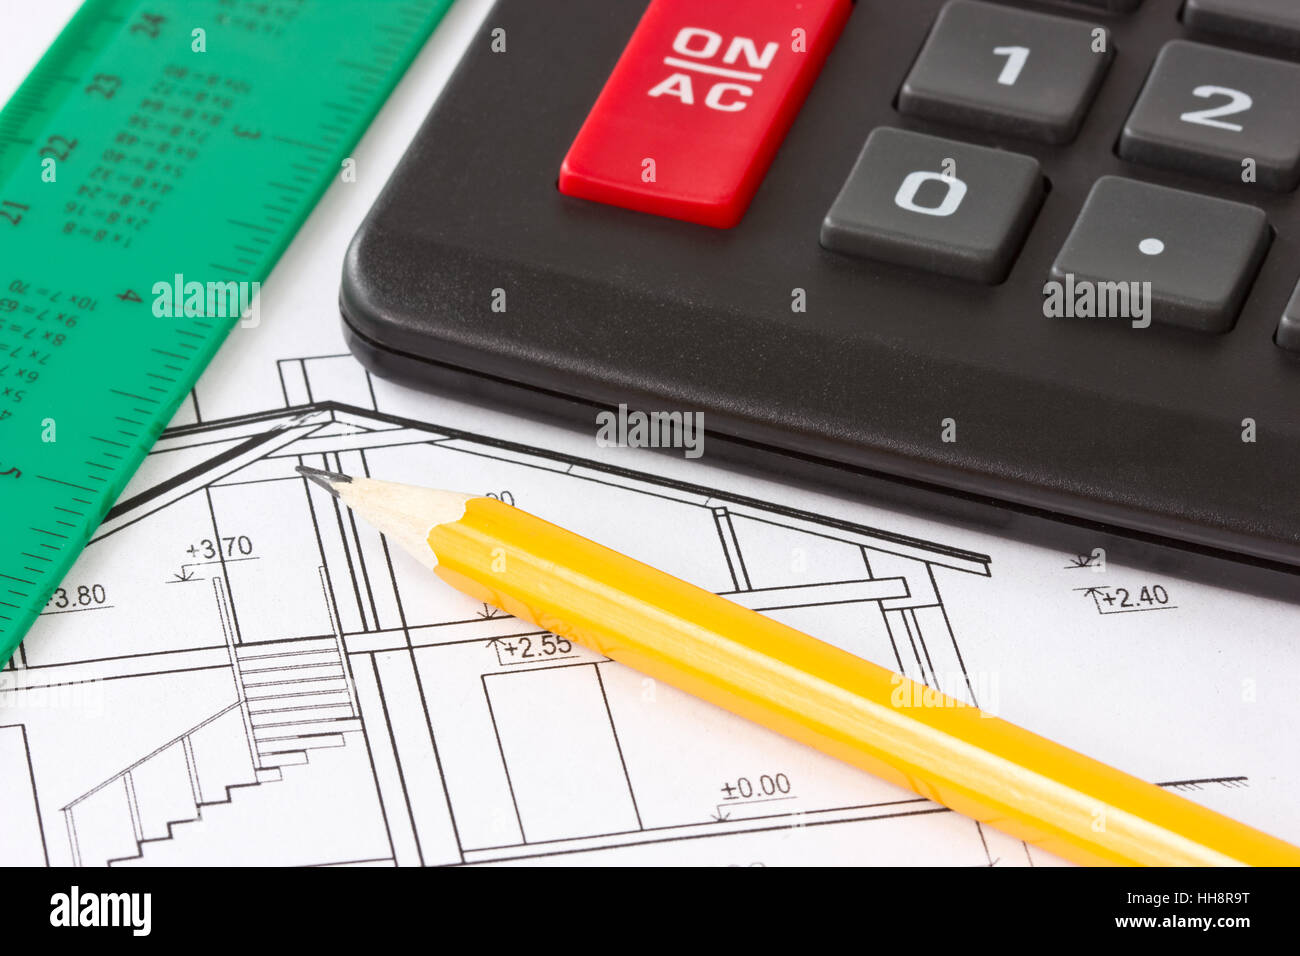 architectural, engineering, business dealings, deal, business transaction, Stock Photo